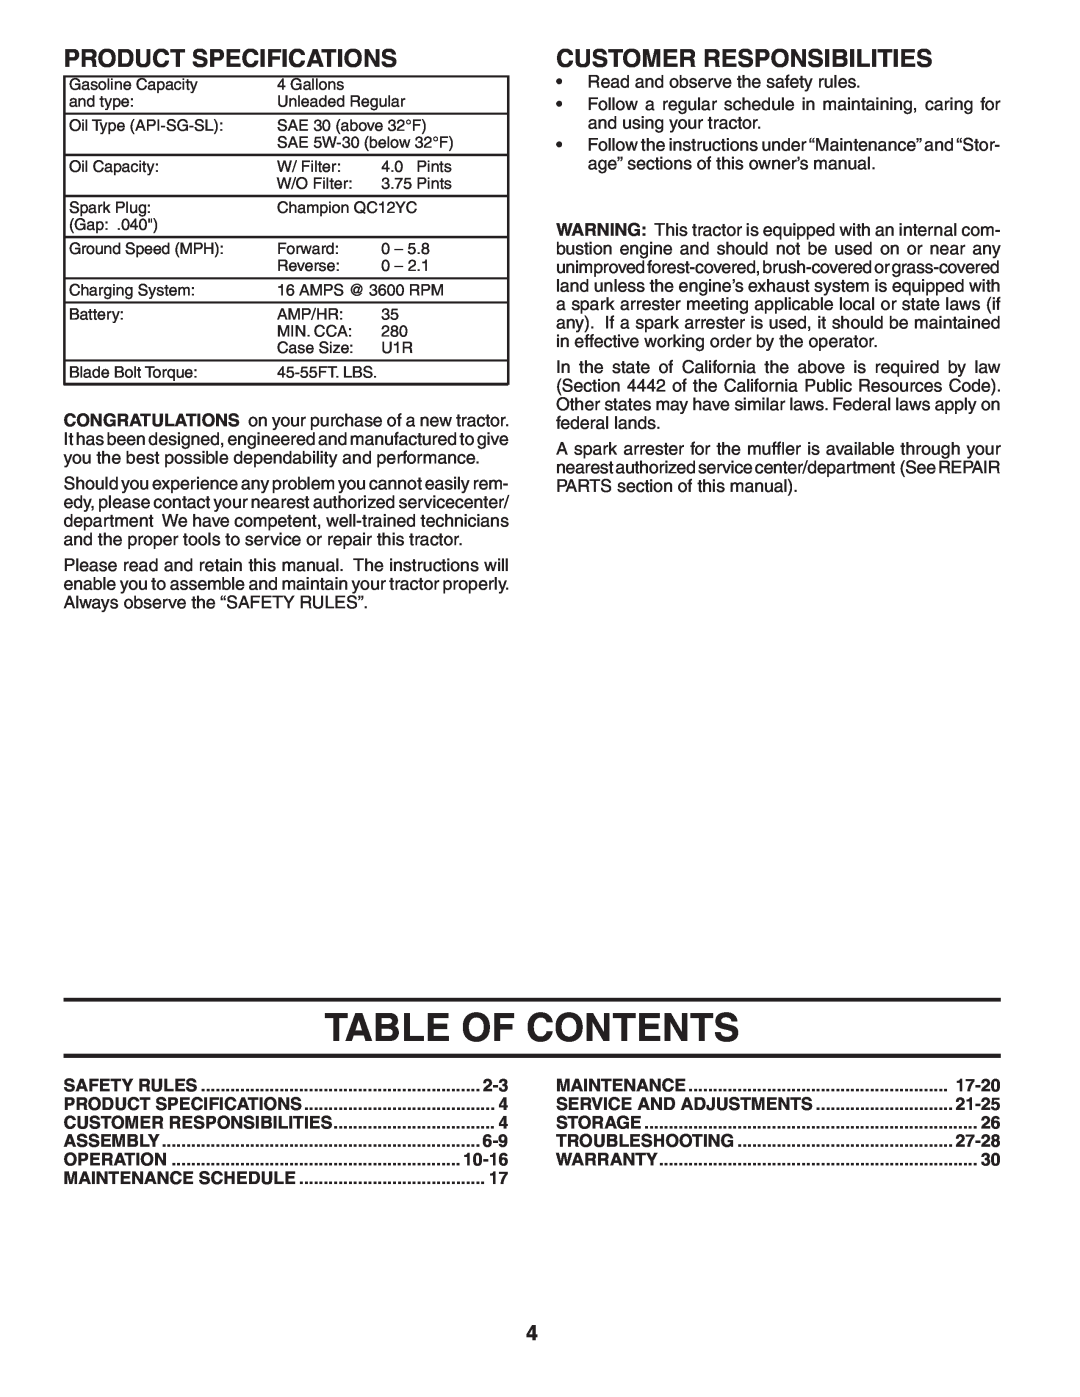 Poulan 402495 manual Table Of Contents, Product Specifications, Customer Responsibilities, 10-16, 17-20, 21-25, 27-28 